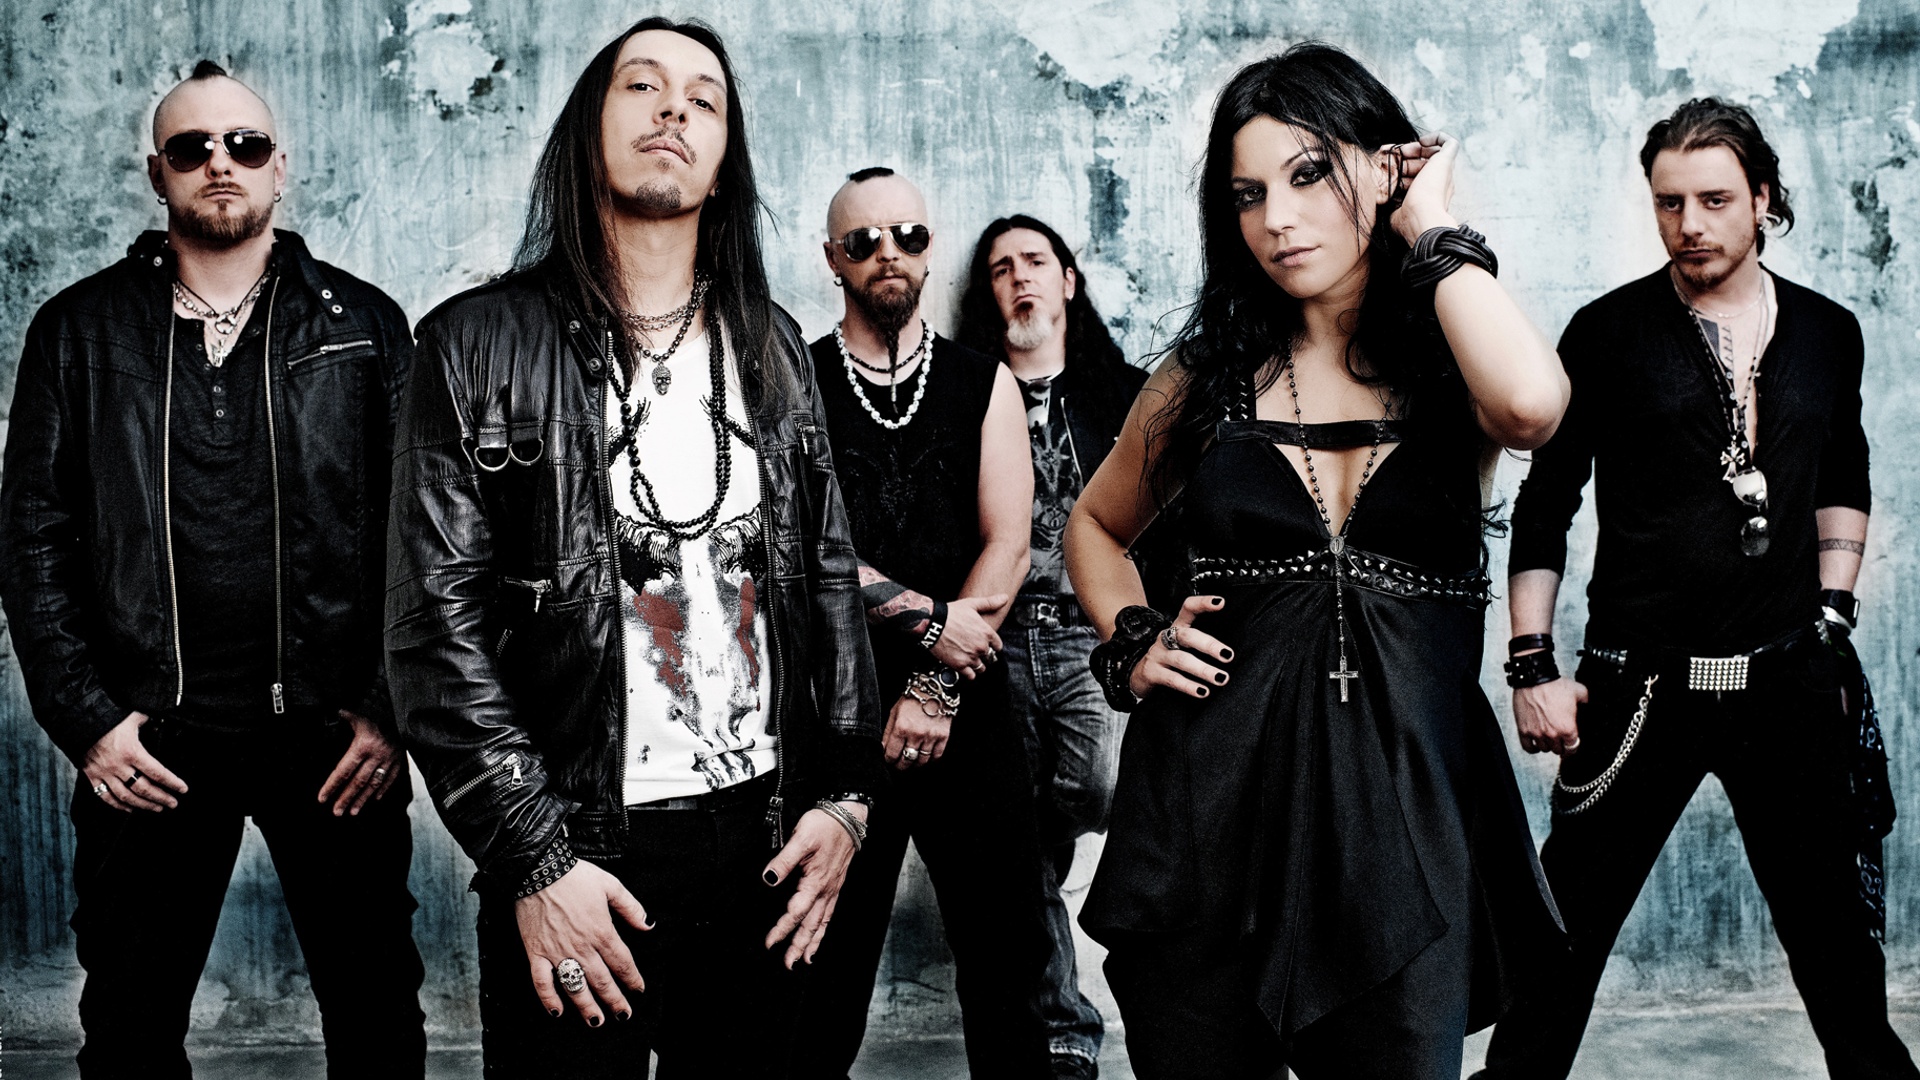 Give Me Something More av Lacuna Coil